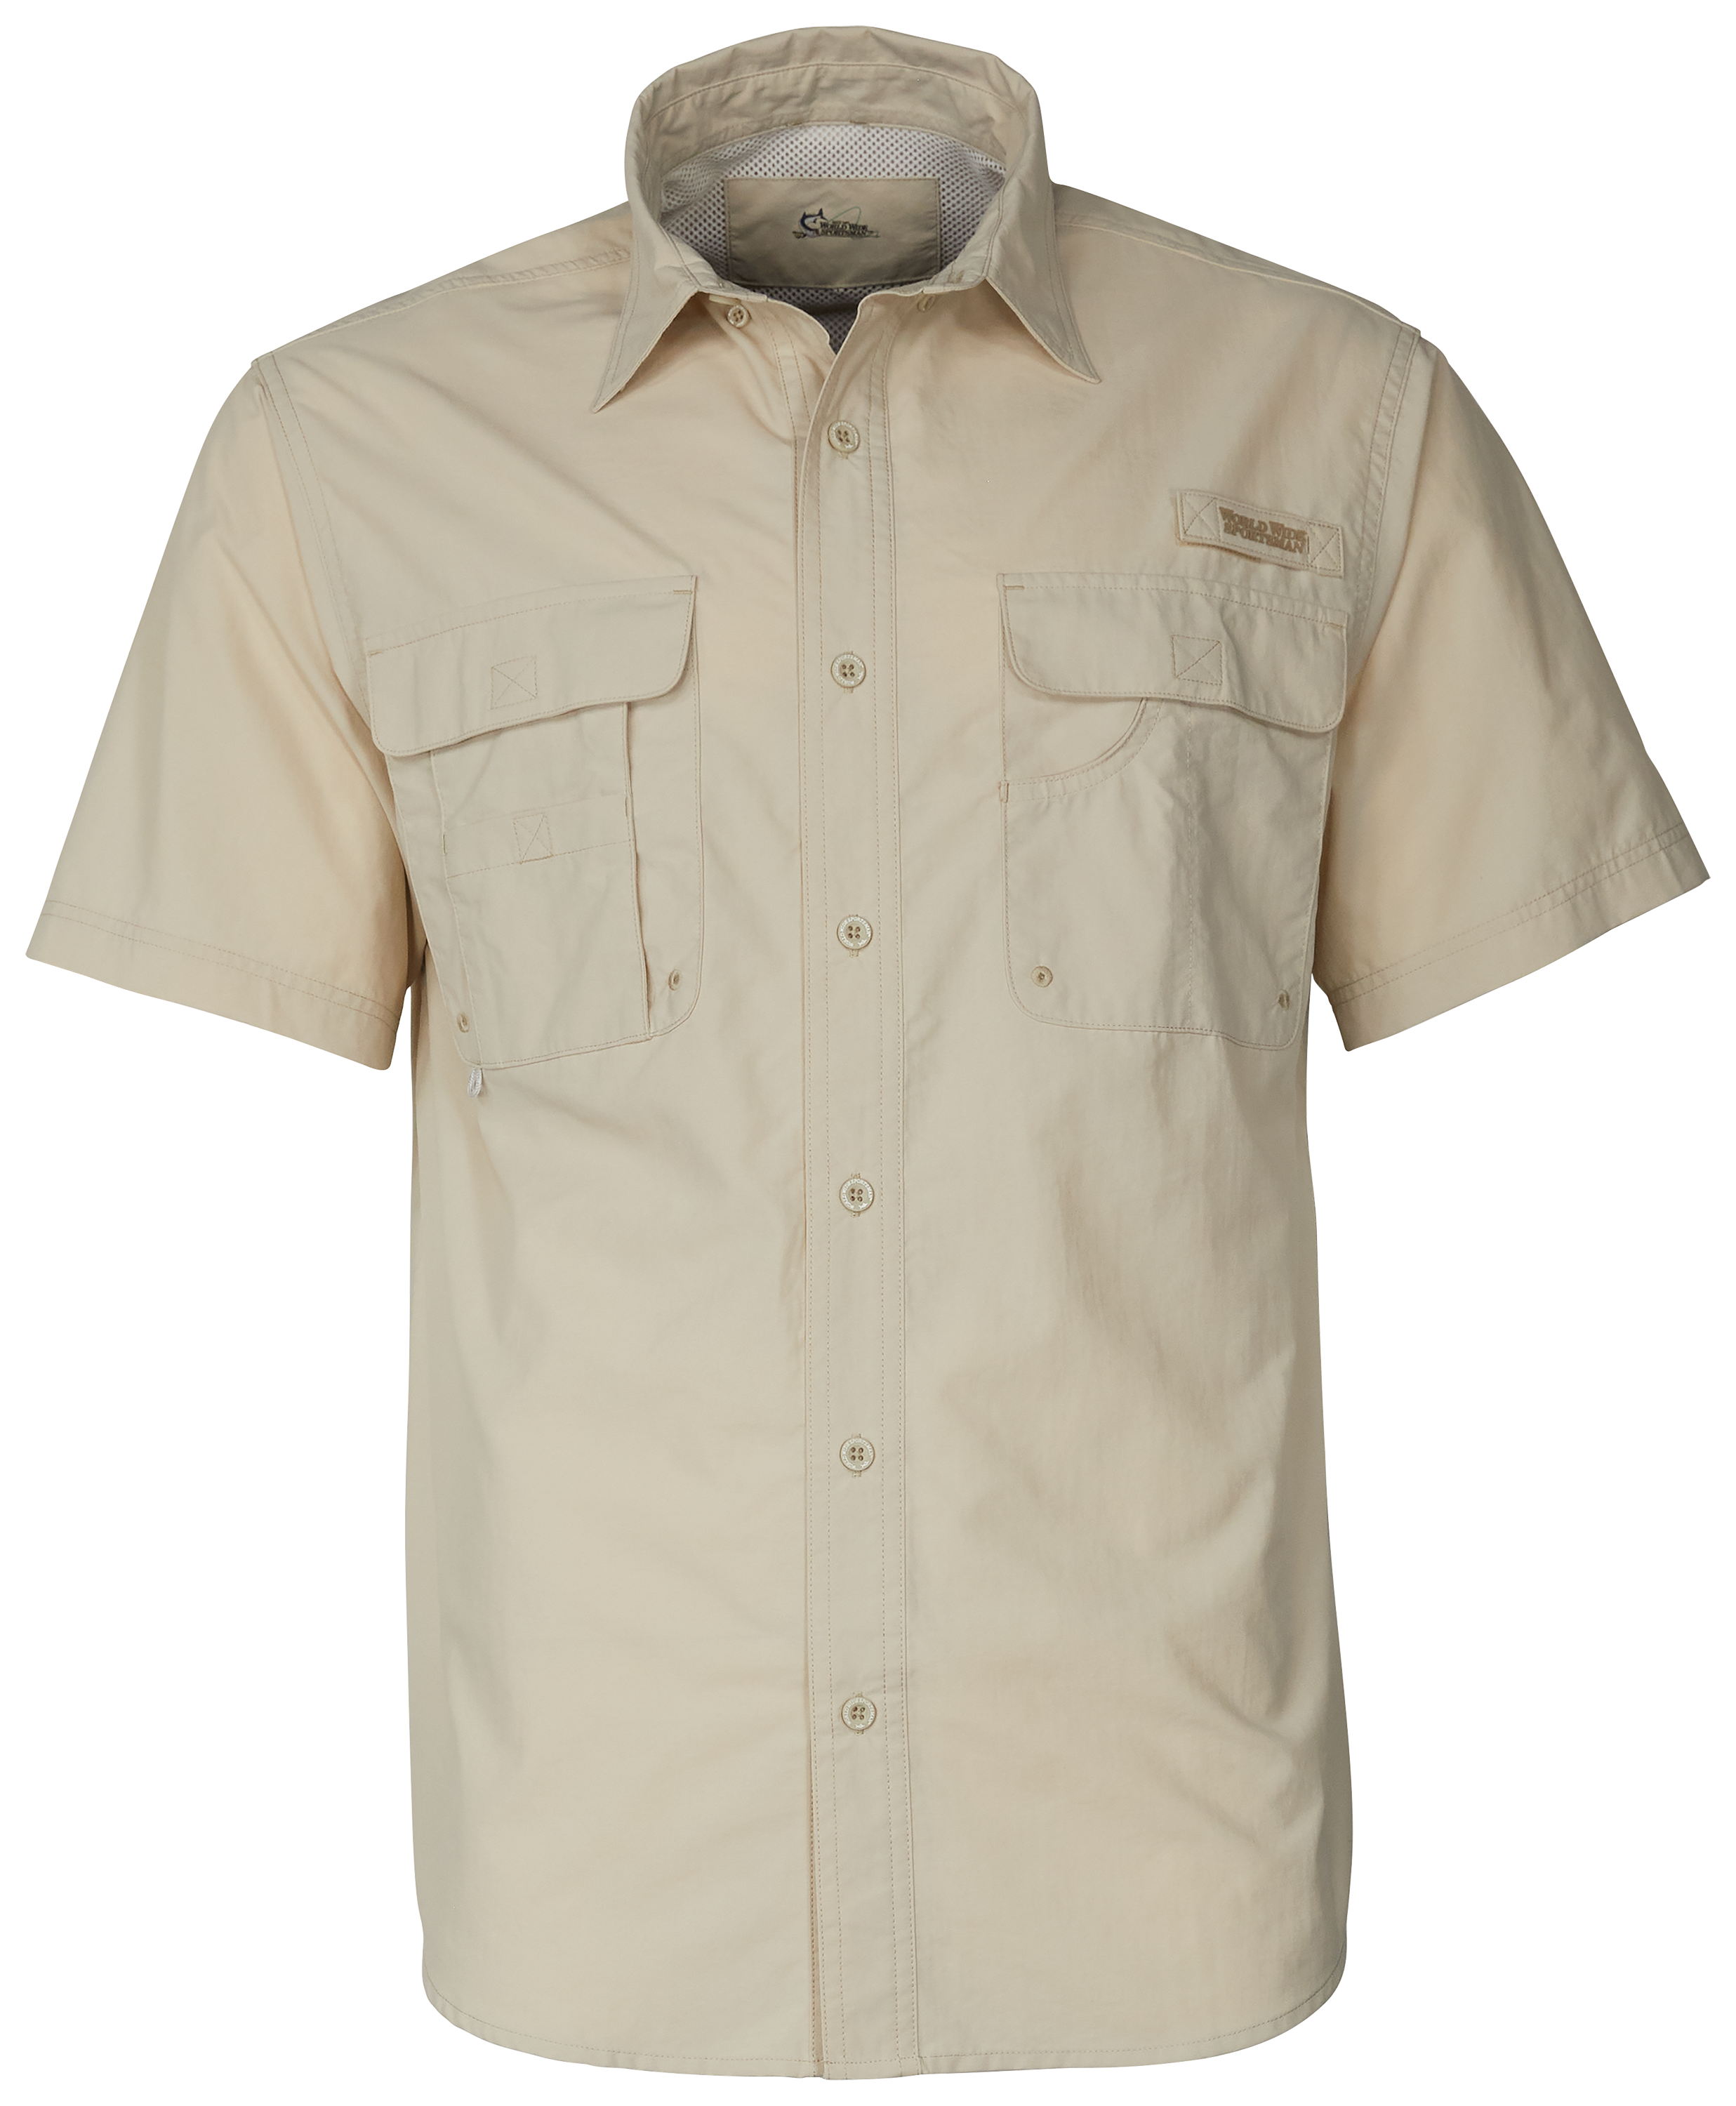 World Wide Sportsman Recycled-Nylon Angler 2.0 Short-Sleeve Button-Down Shirt for Men - Peyote - 3XL